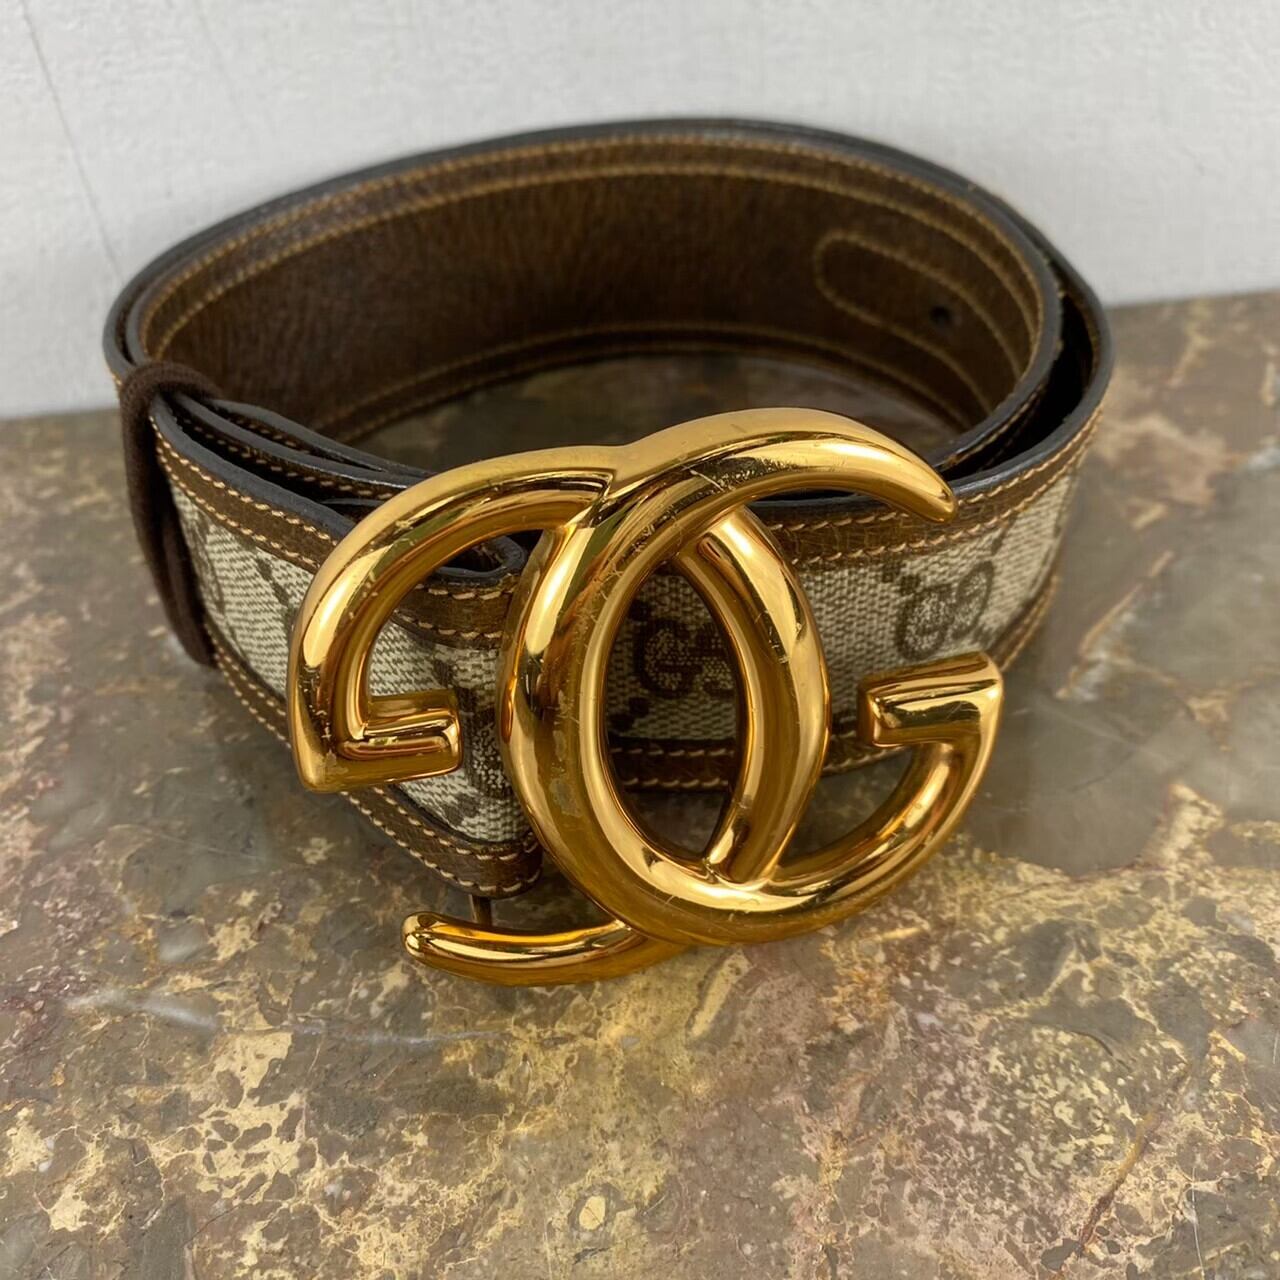 OLD GUCCI GG PATTERNED LOGO BUCKLE BELT MADE IN  ITALY/オールドグッチGG柄ロゴバックルベルト2000000052397 | Titti Clothing